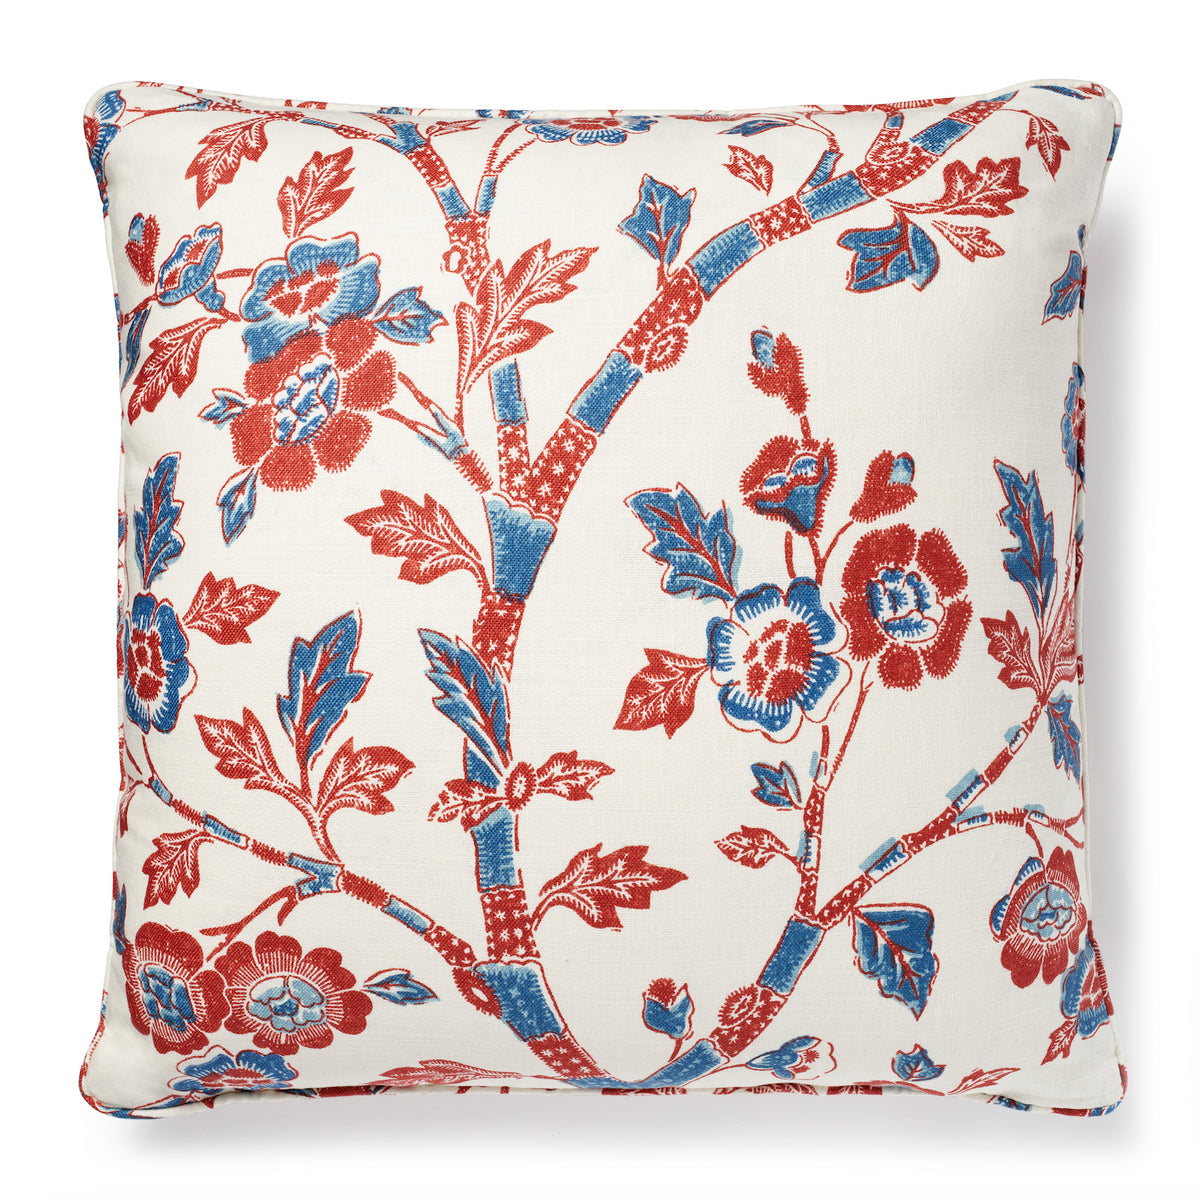 Printed Pillow in Malabar & Red